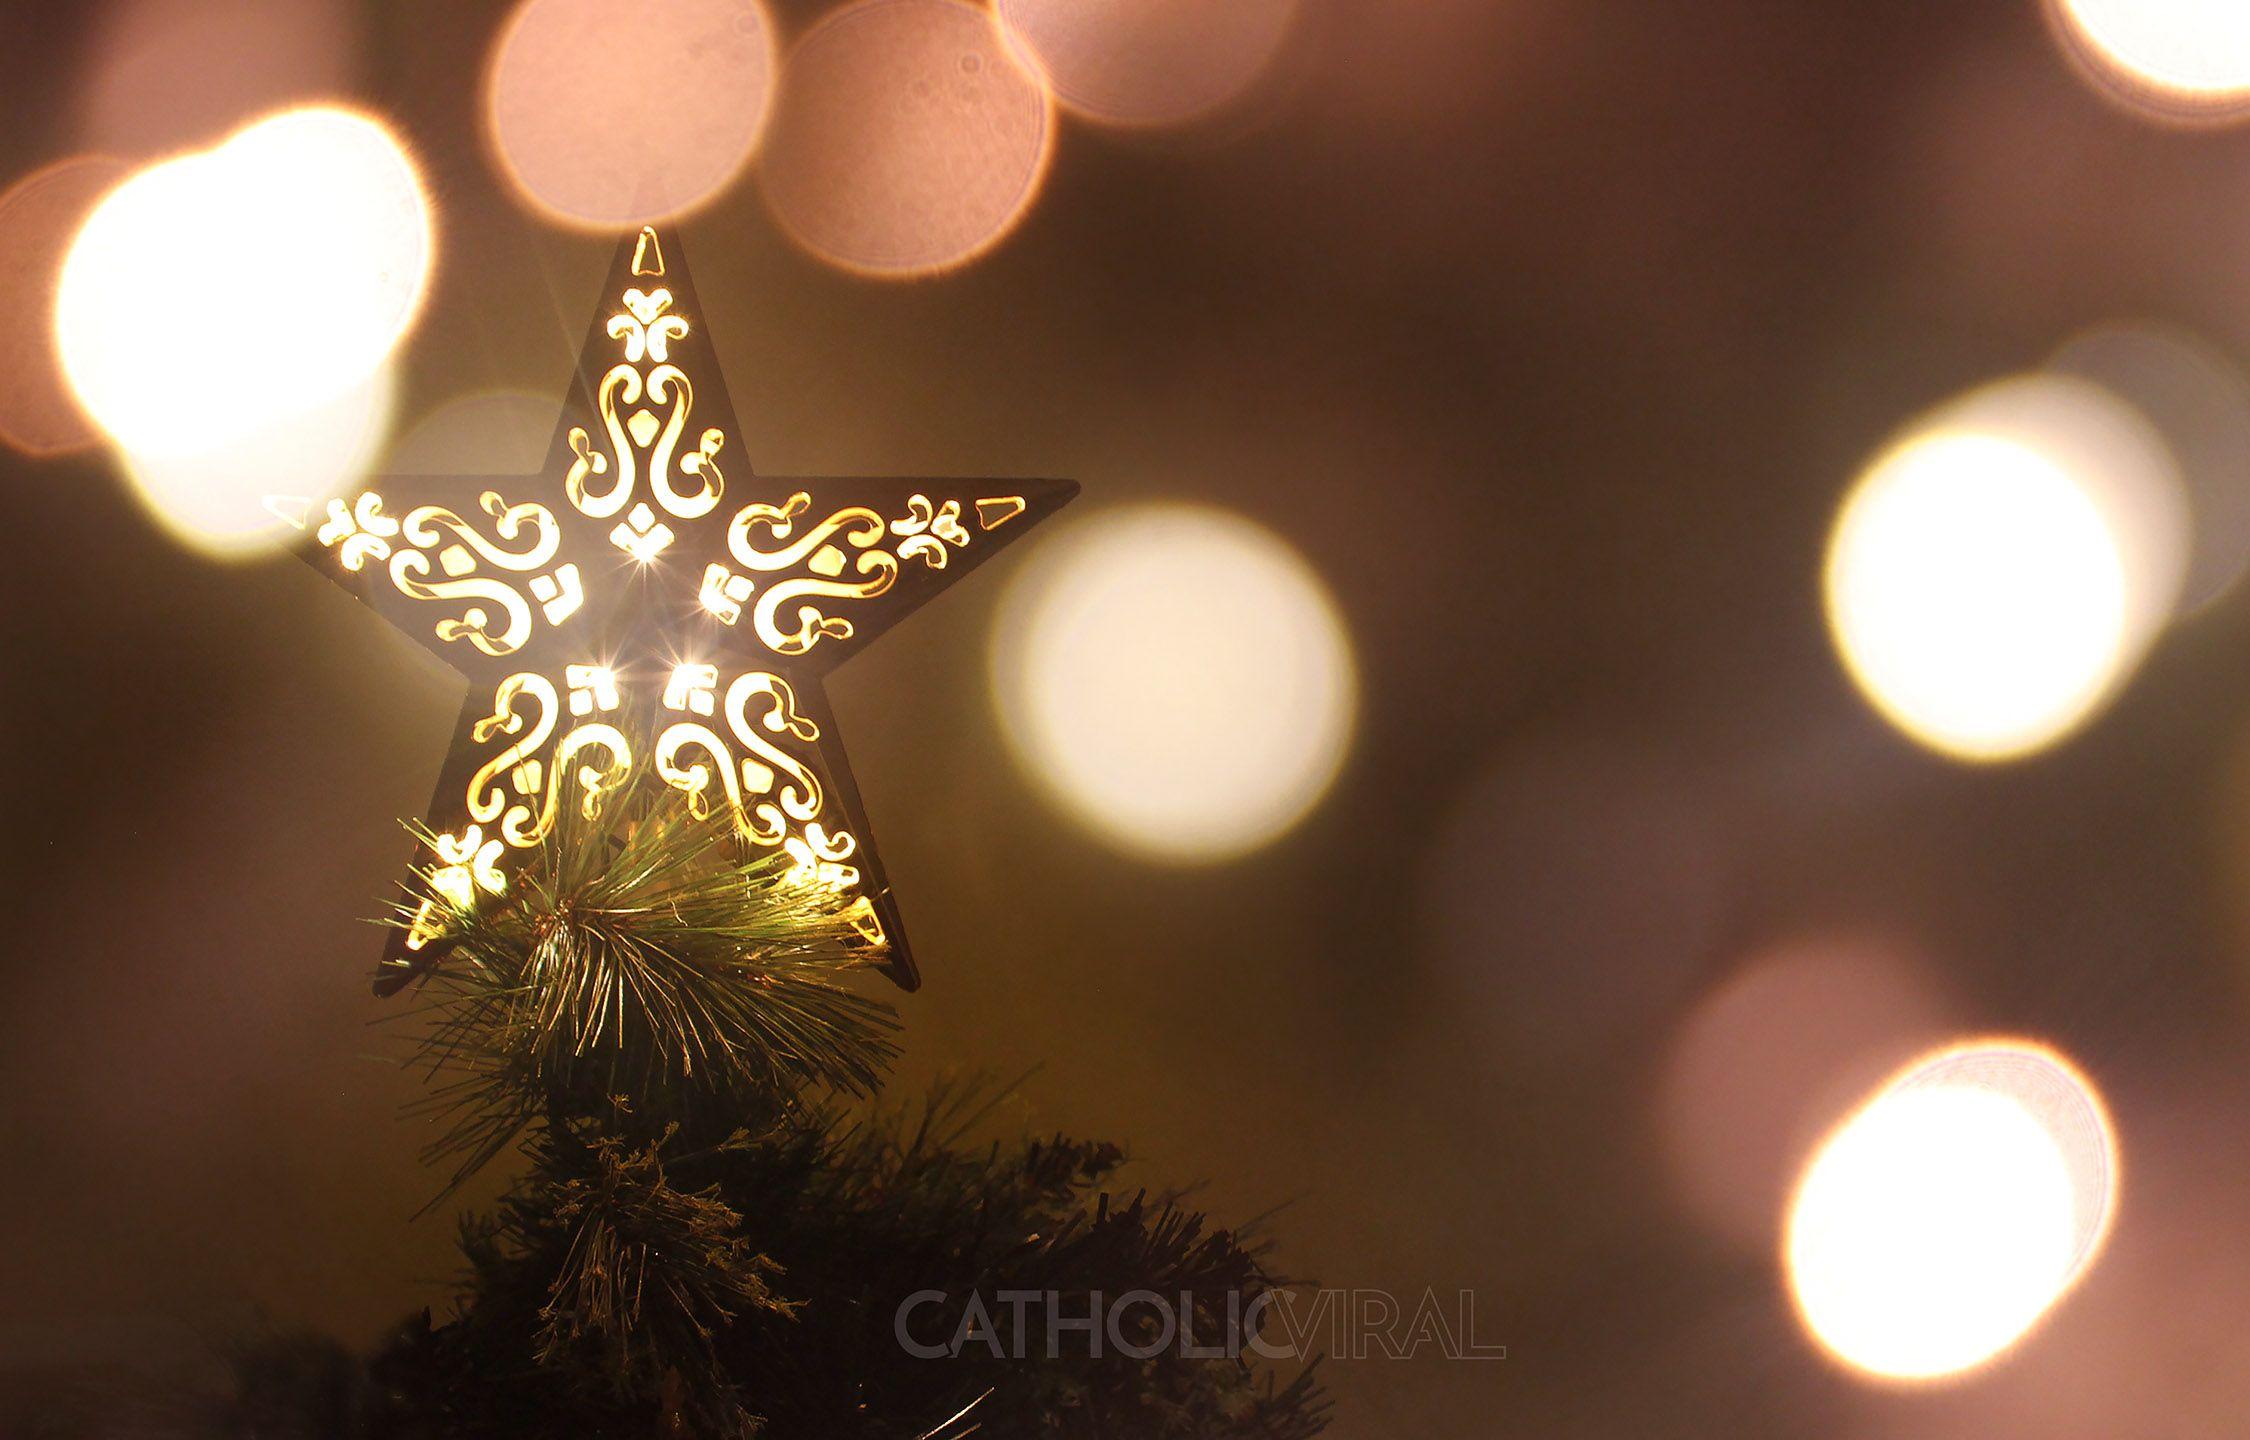 Christmas Star Wallpaper (Picture)